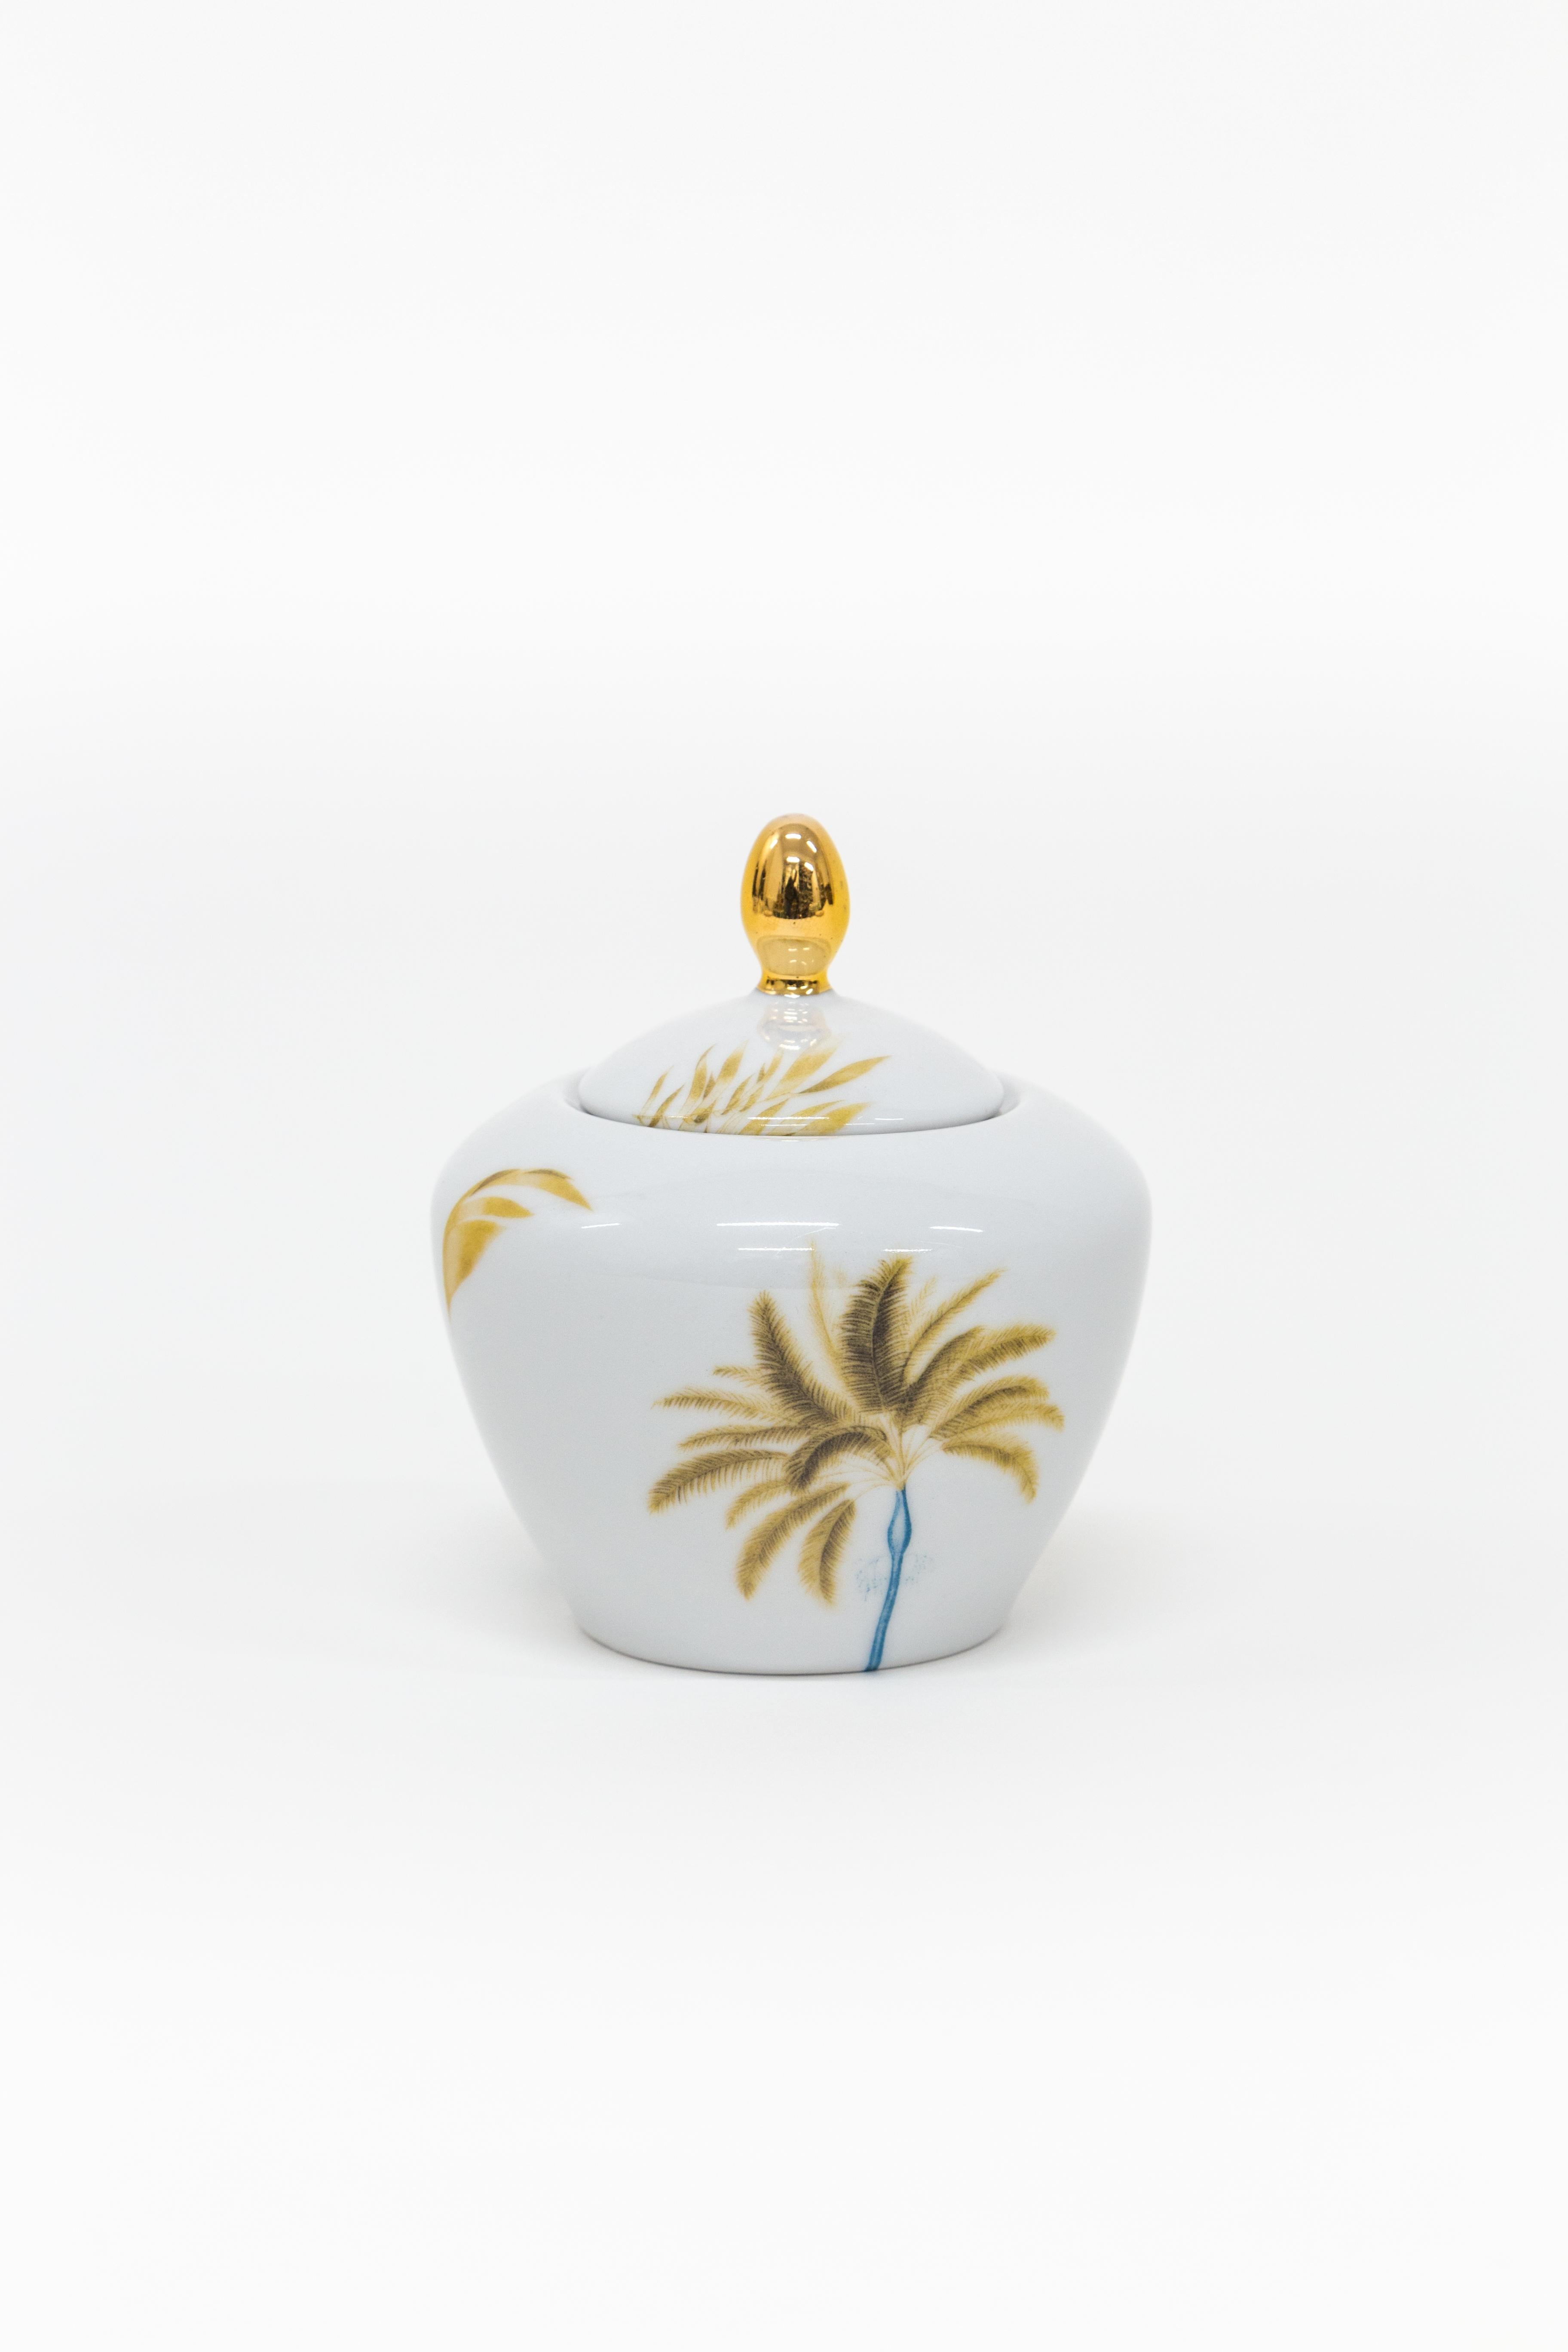 Other Las Palmas, Contemporary Decorated Porcelain Tea Time Set by Vito Nesta For Sale